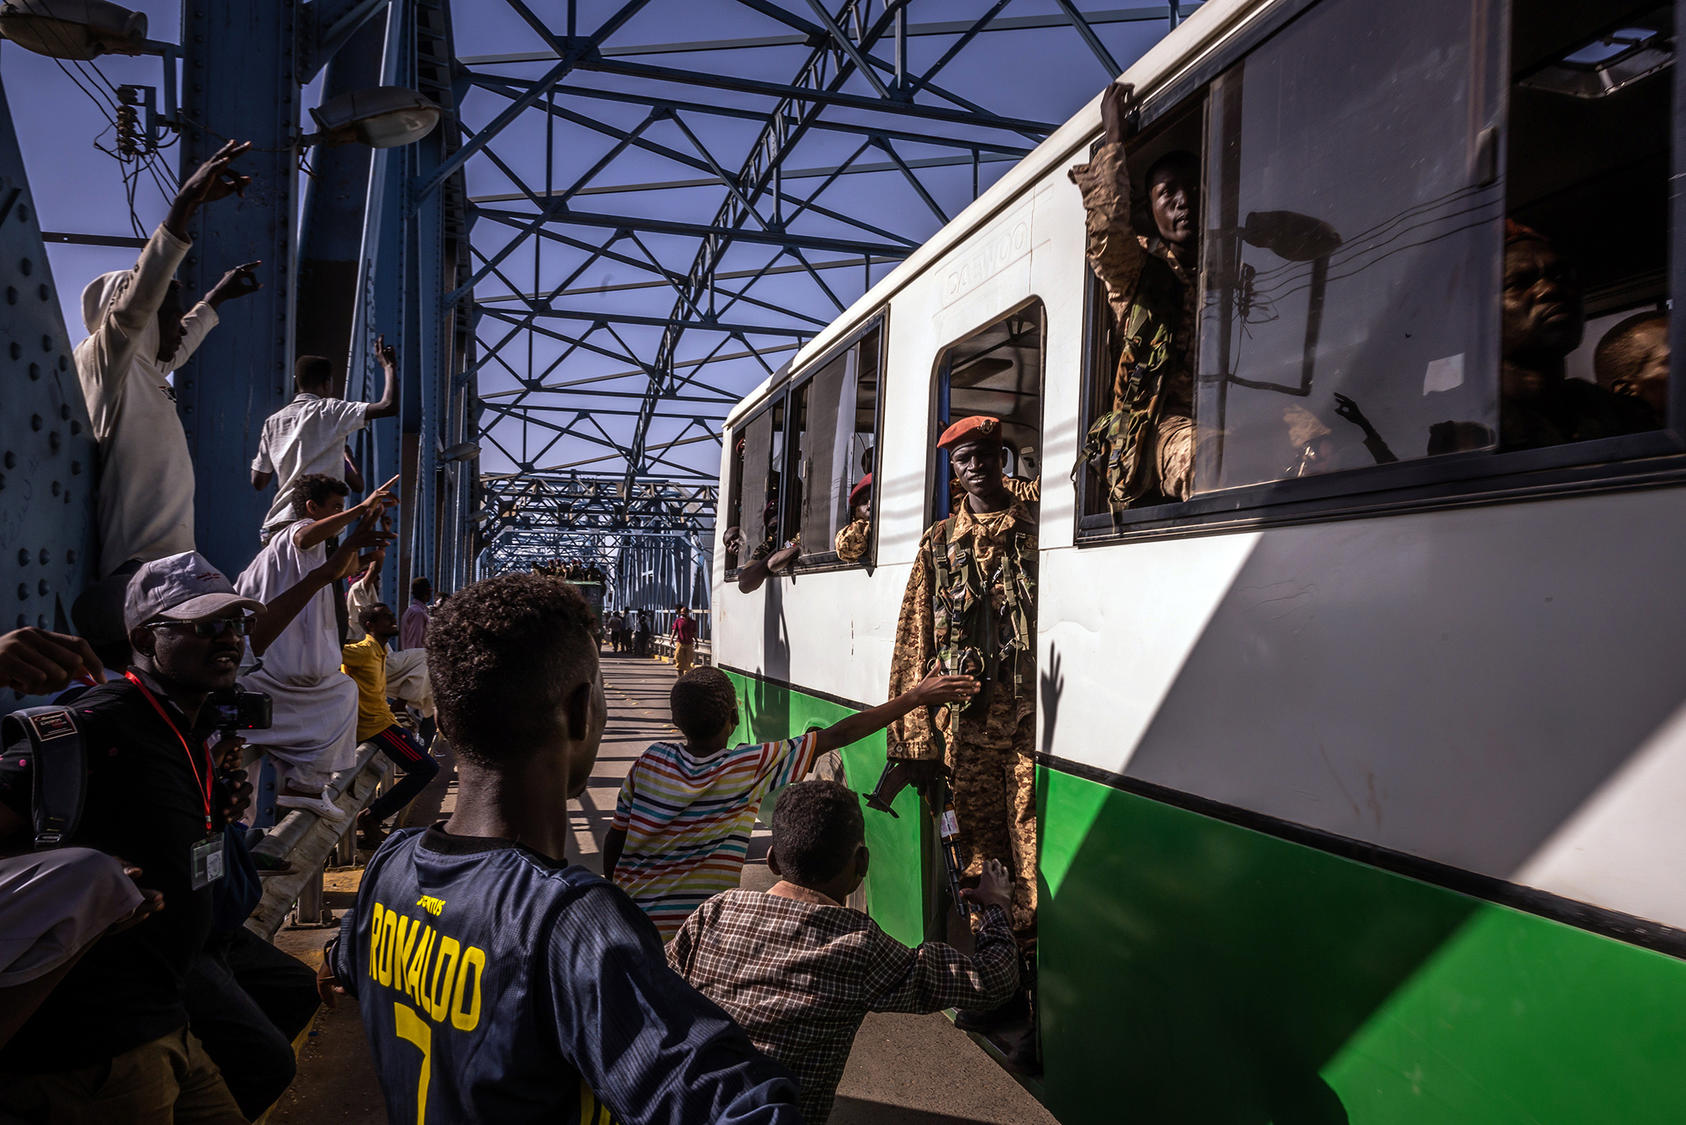 Protesters cheer as a bus carrying solders is driven over a bridge near the site of a sit-in outside military headquarters in Khartoum, Sudan. Tuesday, April 23, 2019. (Bryan Denton/The New York Times)